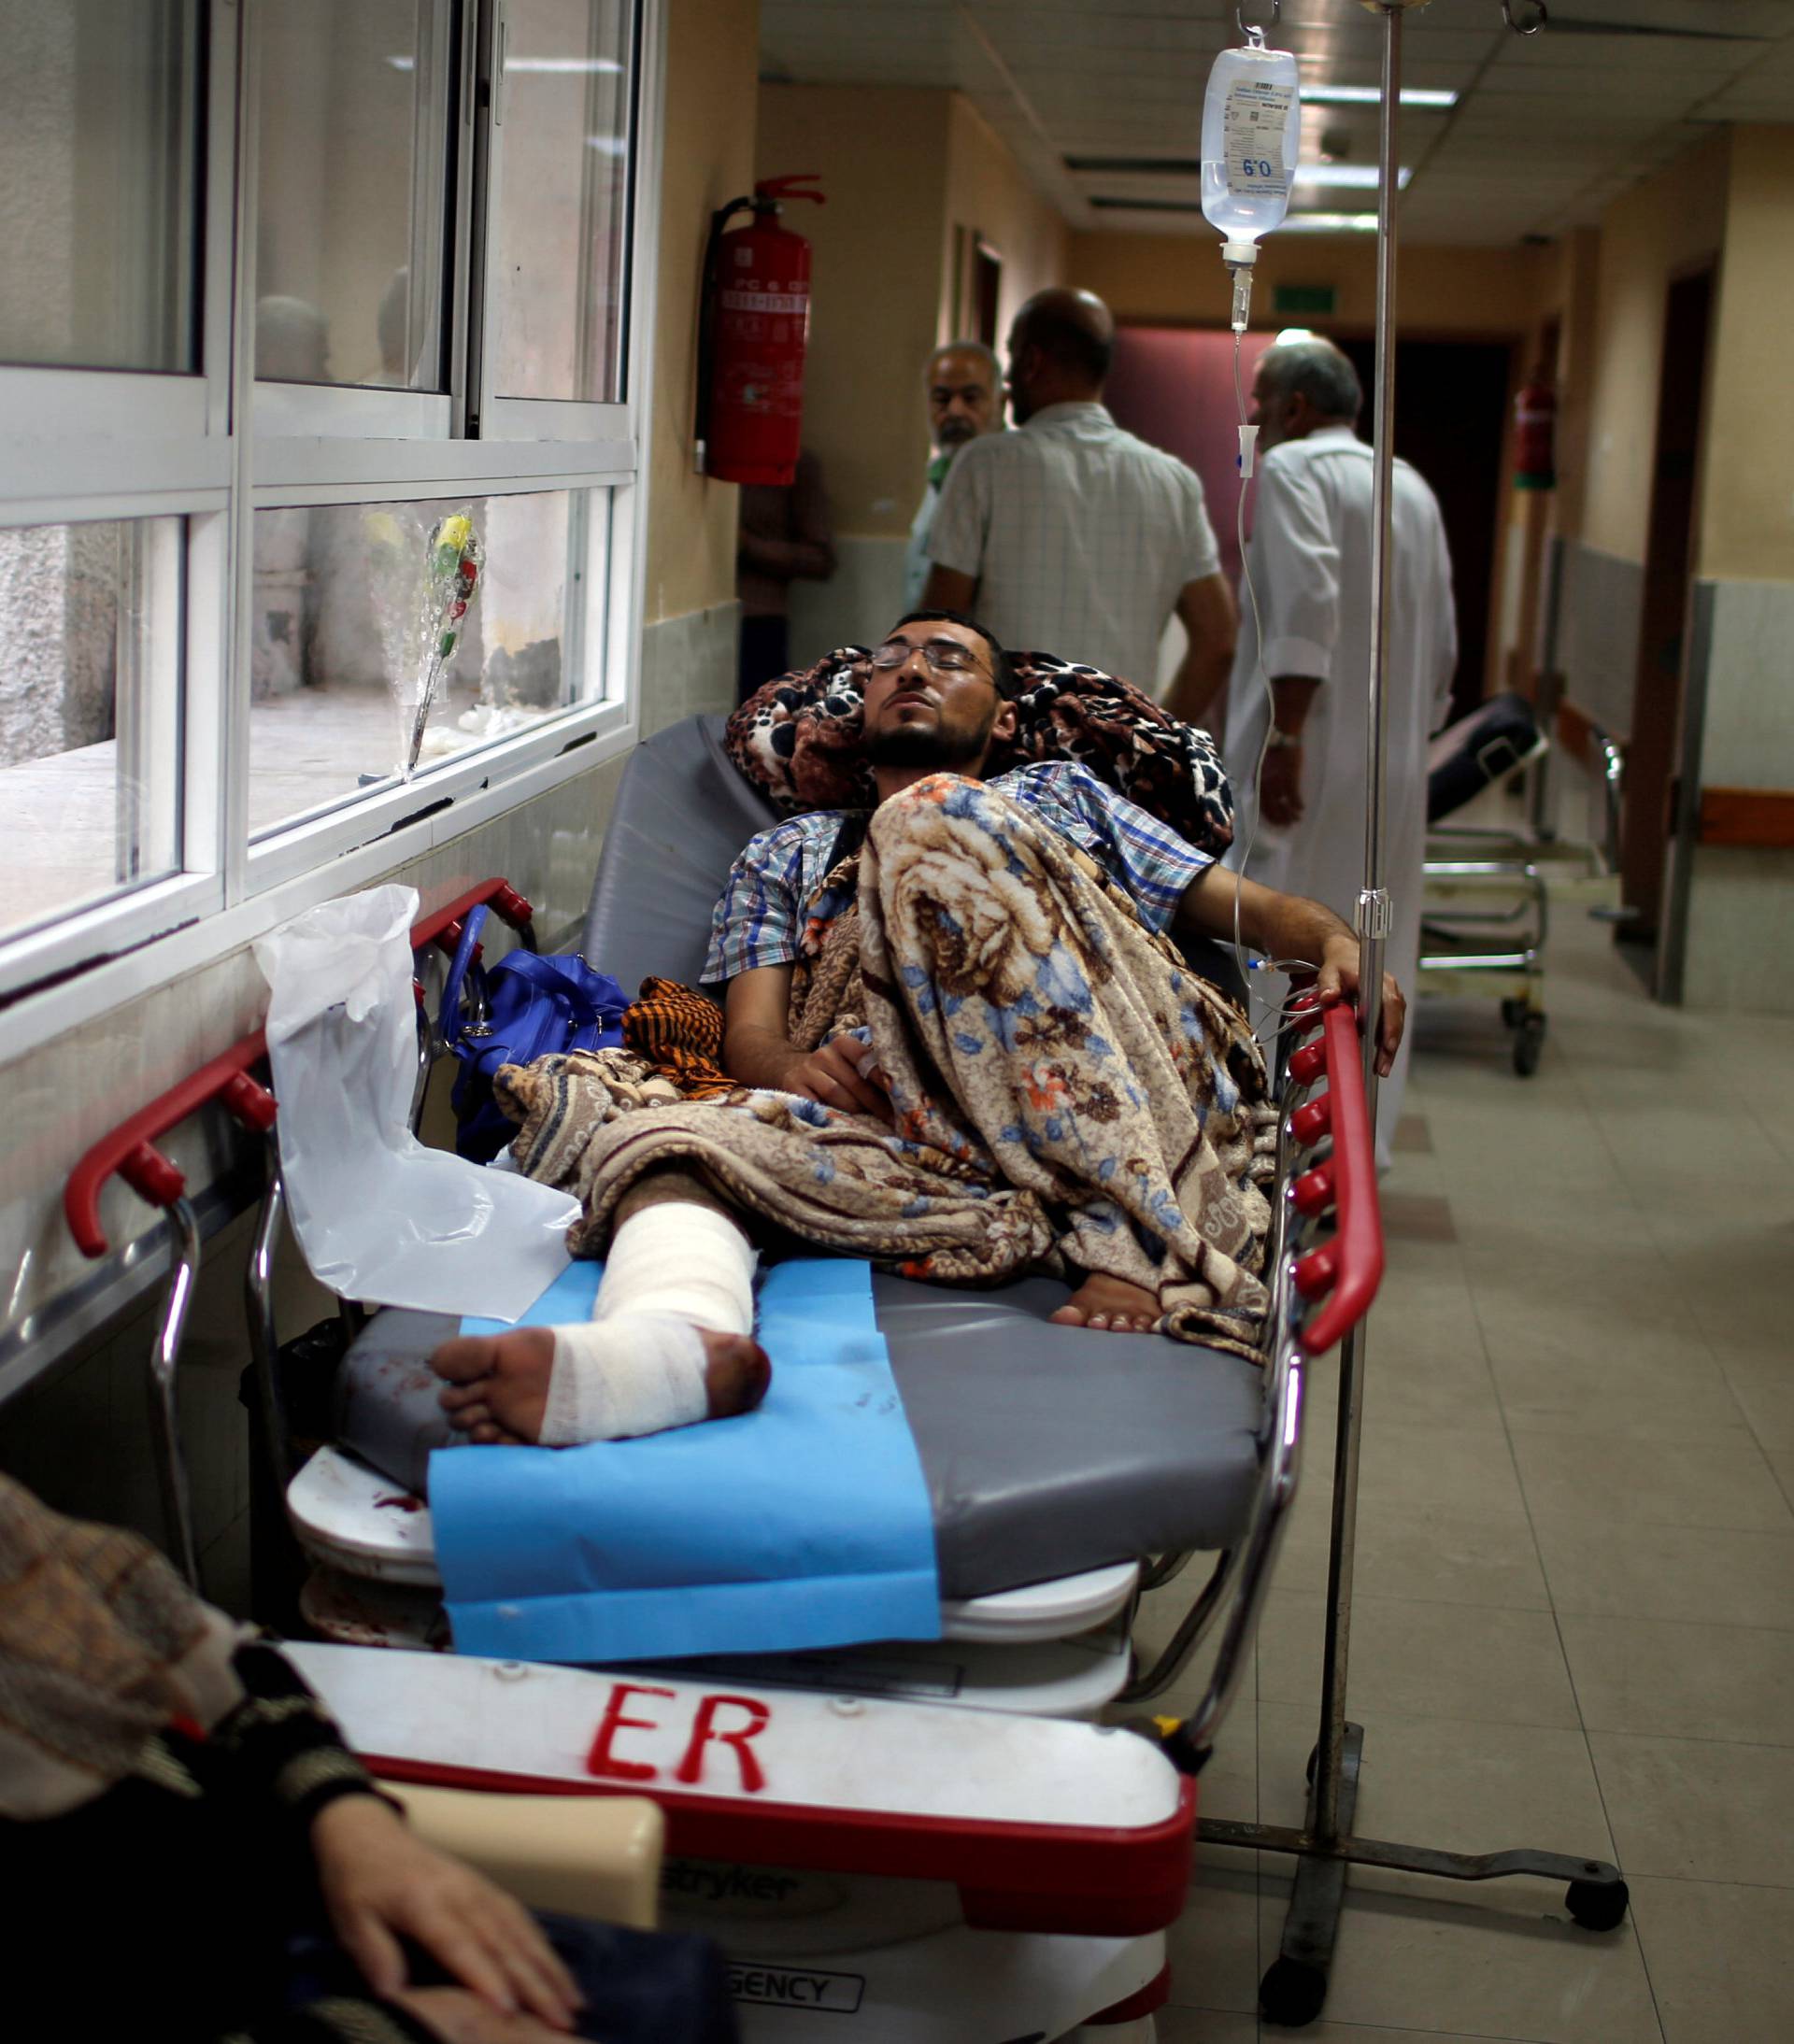 Injured Palestinian lies on a bed in the corridor of a hospital in Gaza City